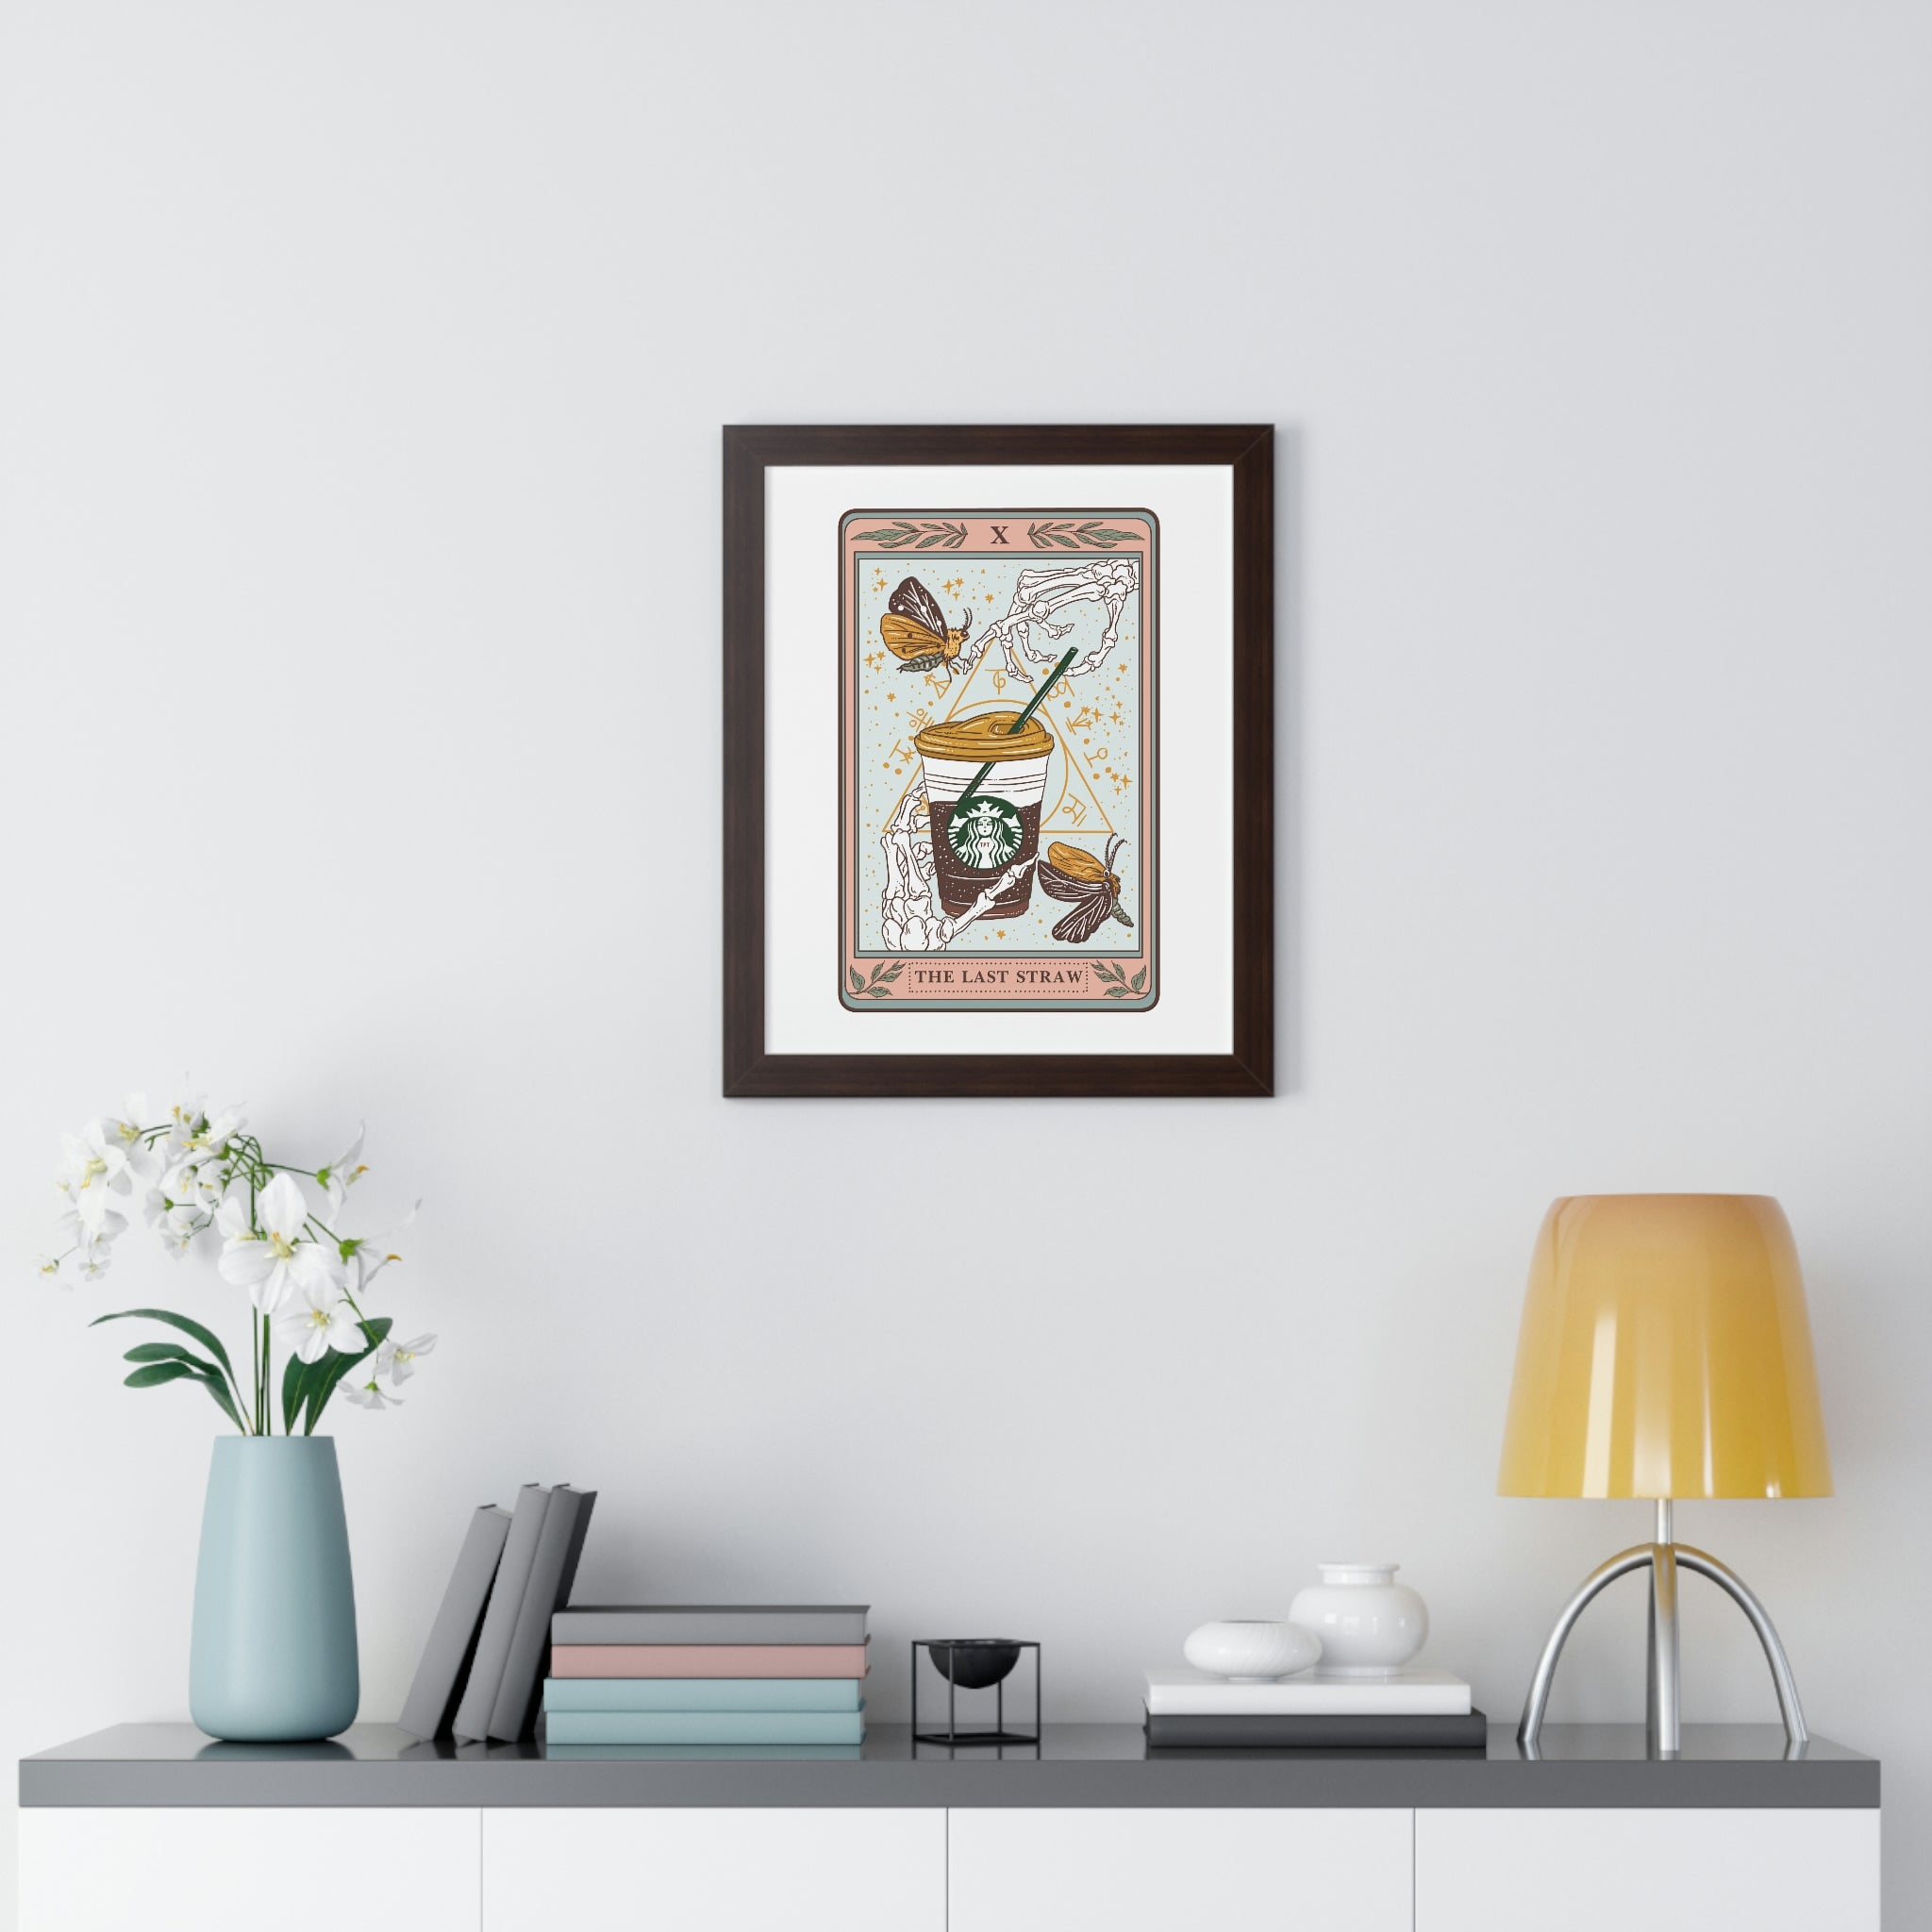 THE LAST STRAW // FRAMED POSTER PRINT